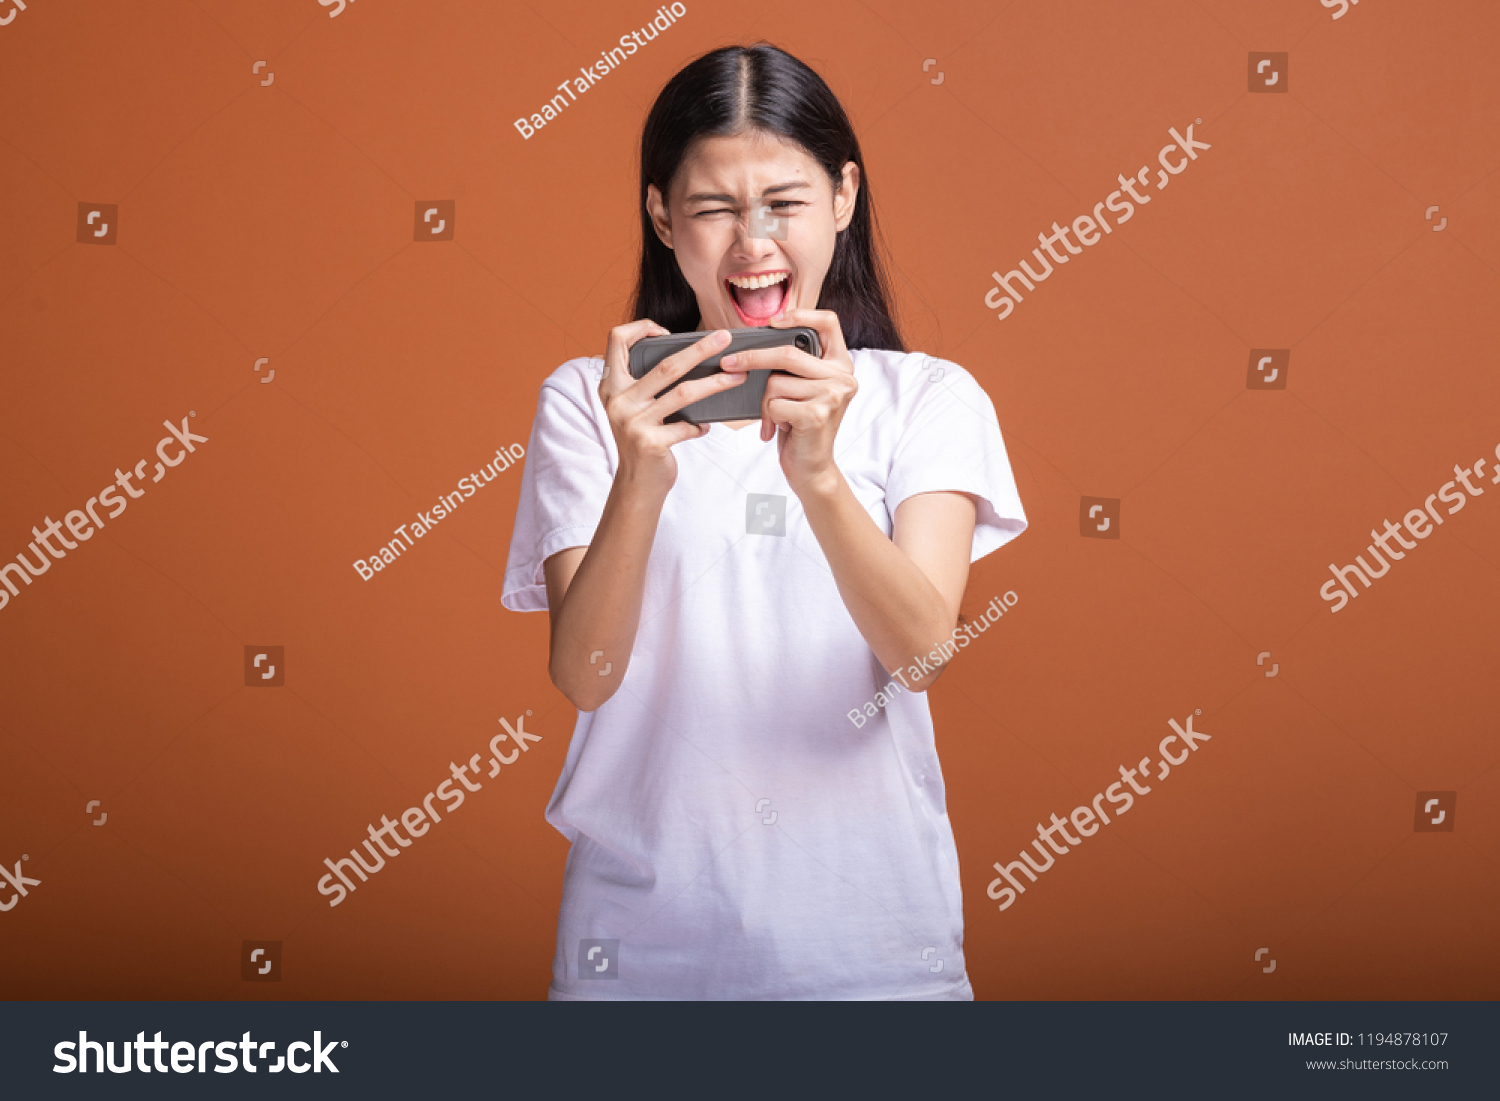 Woman playing mobile game isolated over orange background. Young asian woman in white t-shirt, upset mood. Young hipster lifestyle concept. #1194878107